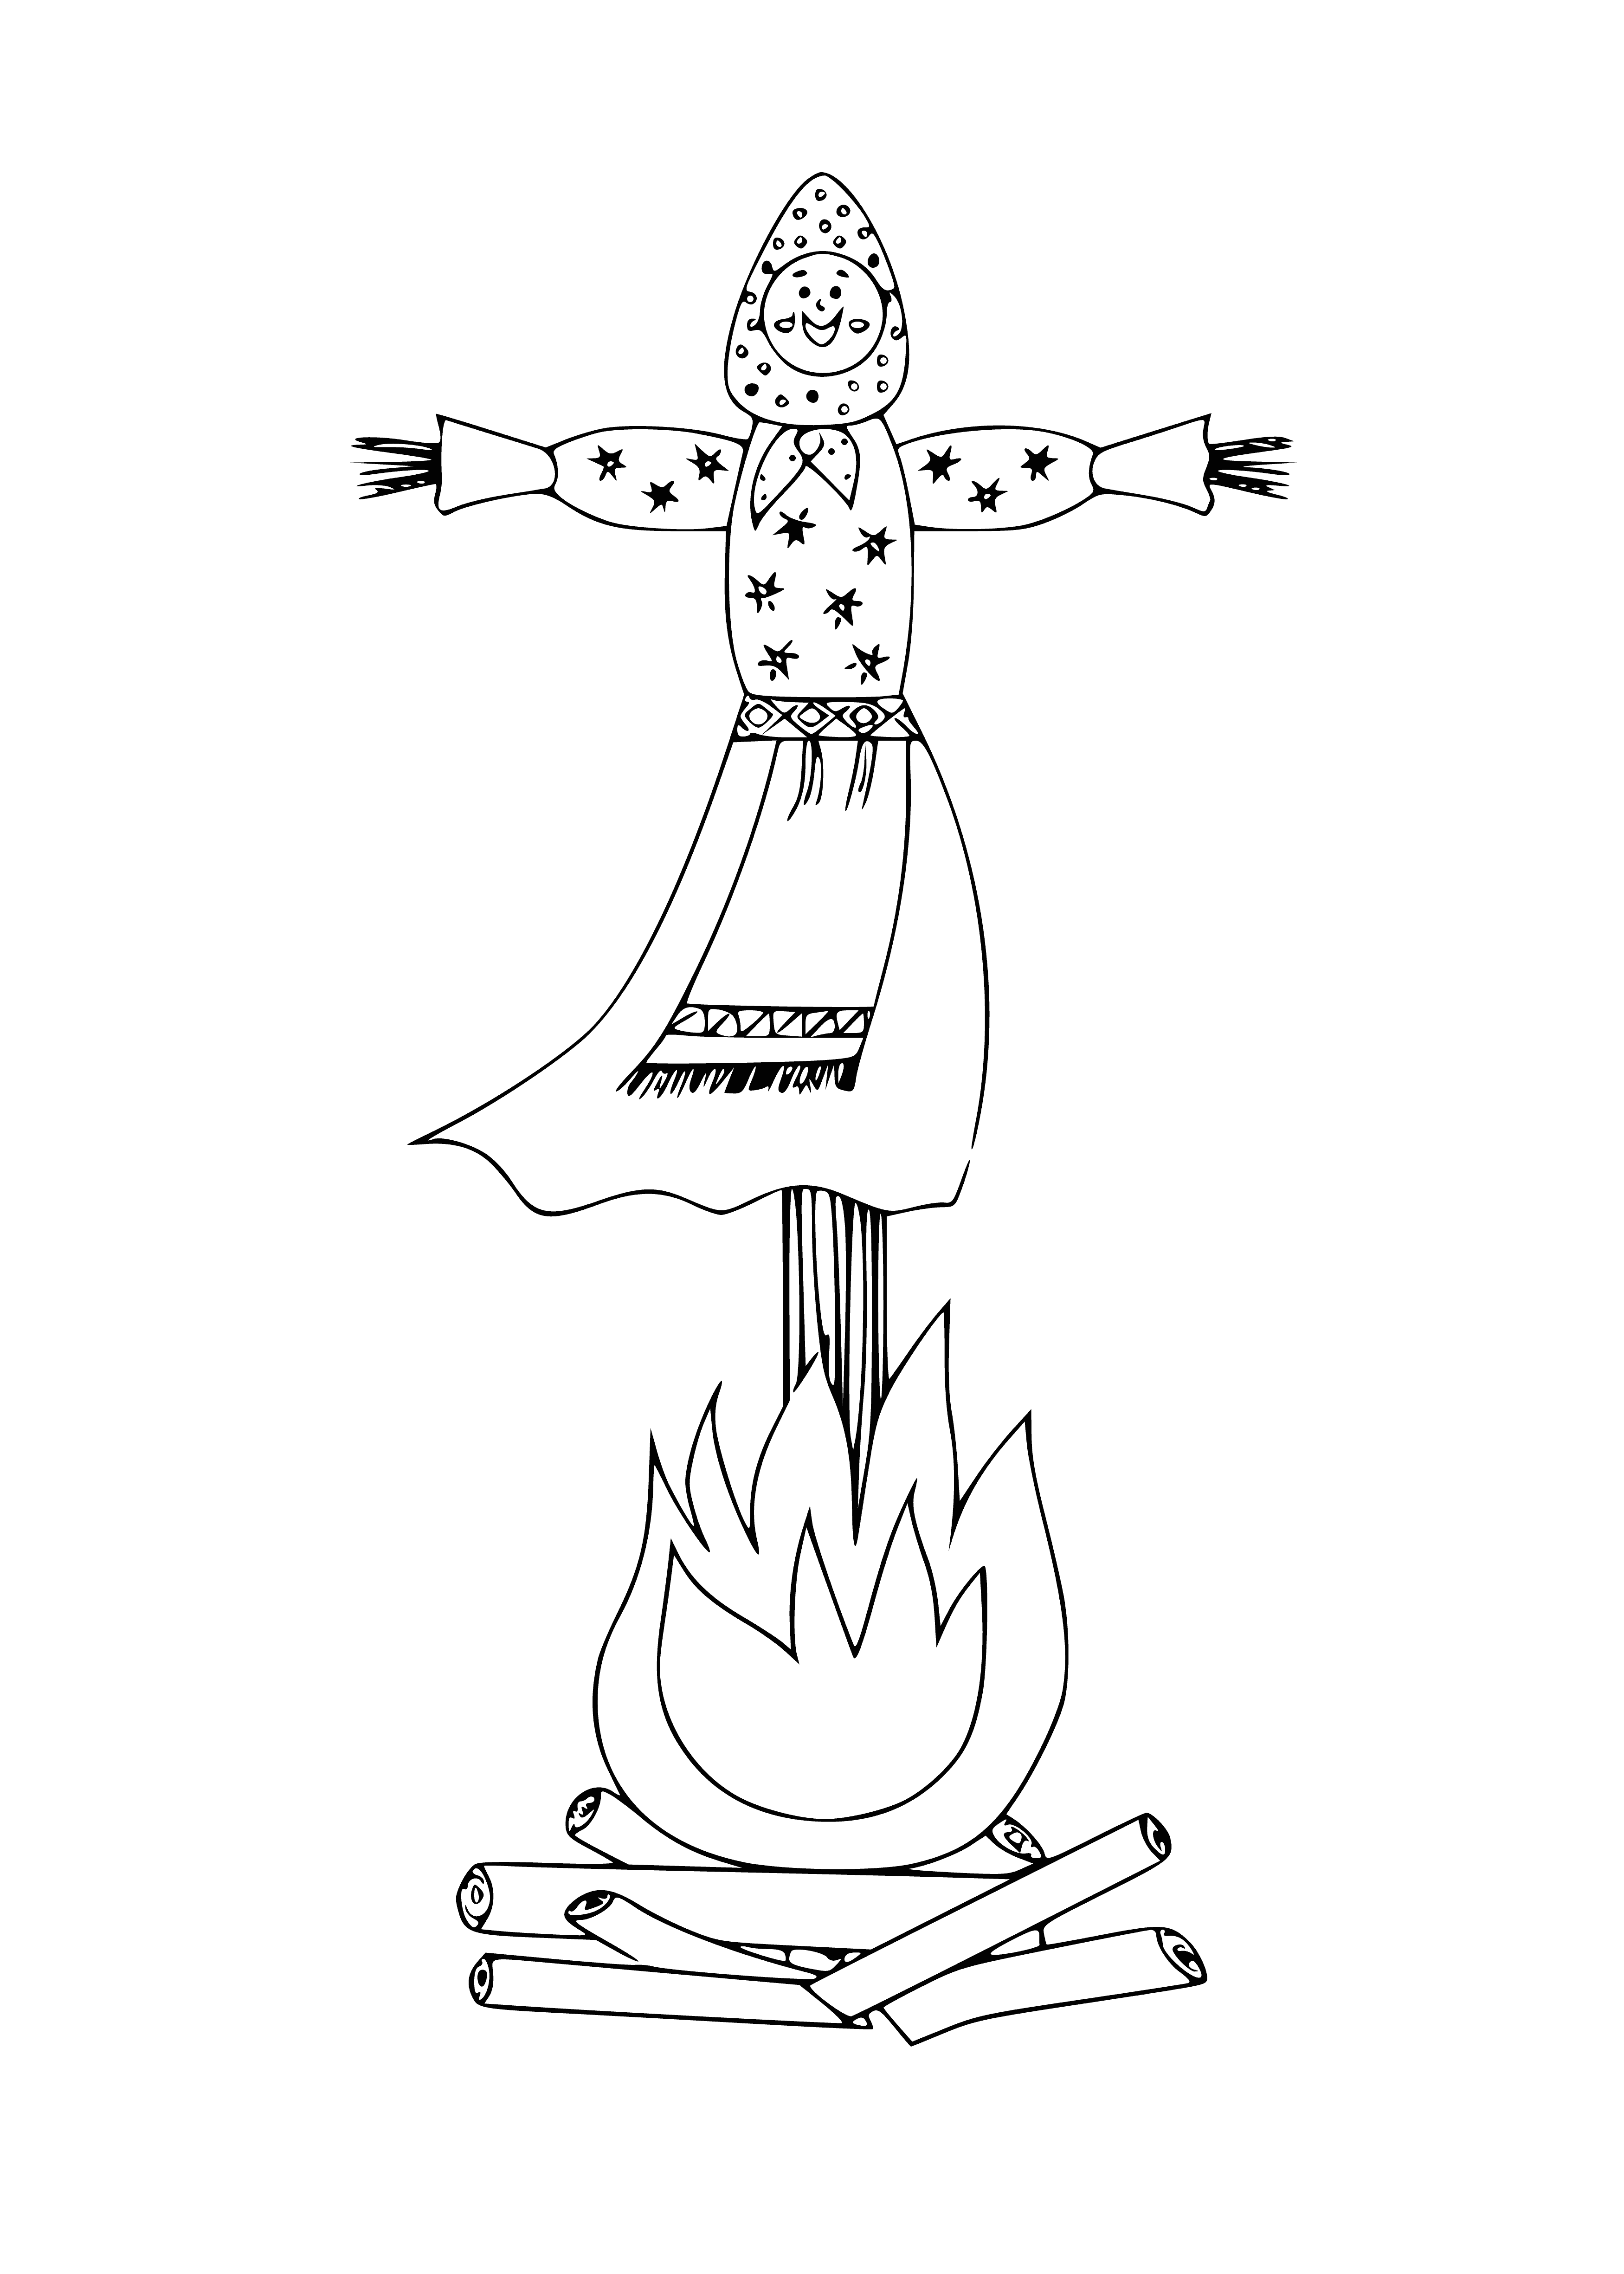 coloring page: France's Orleans holds a festival every yr before Ash Wednesday: parade & burning of a cat effigy to mark end of winter & start of spring.